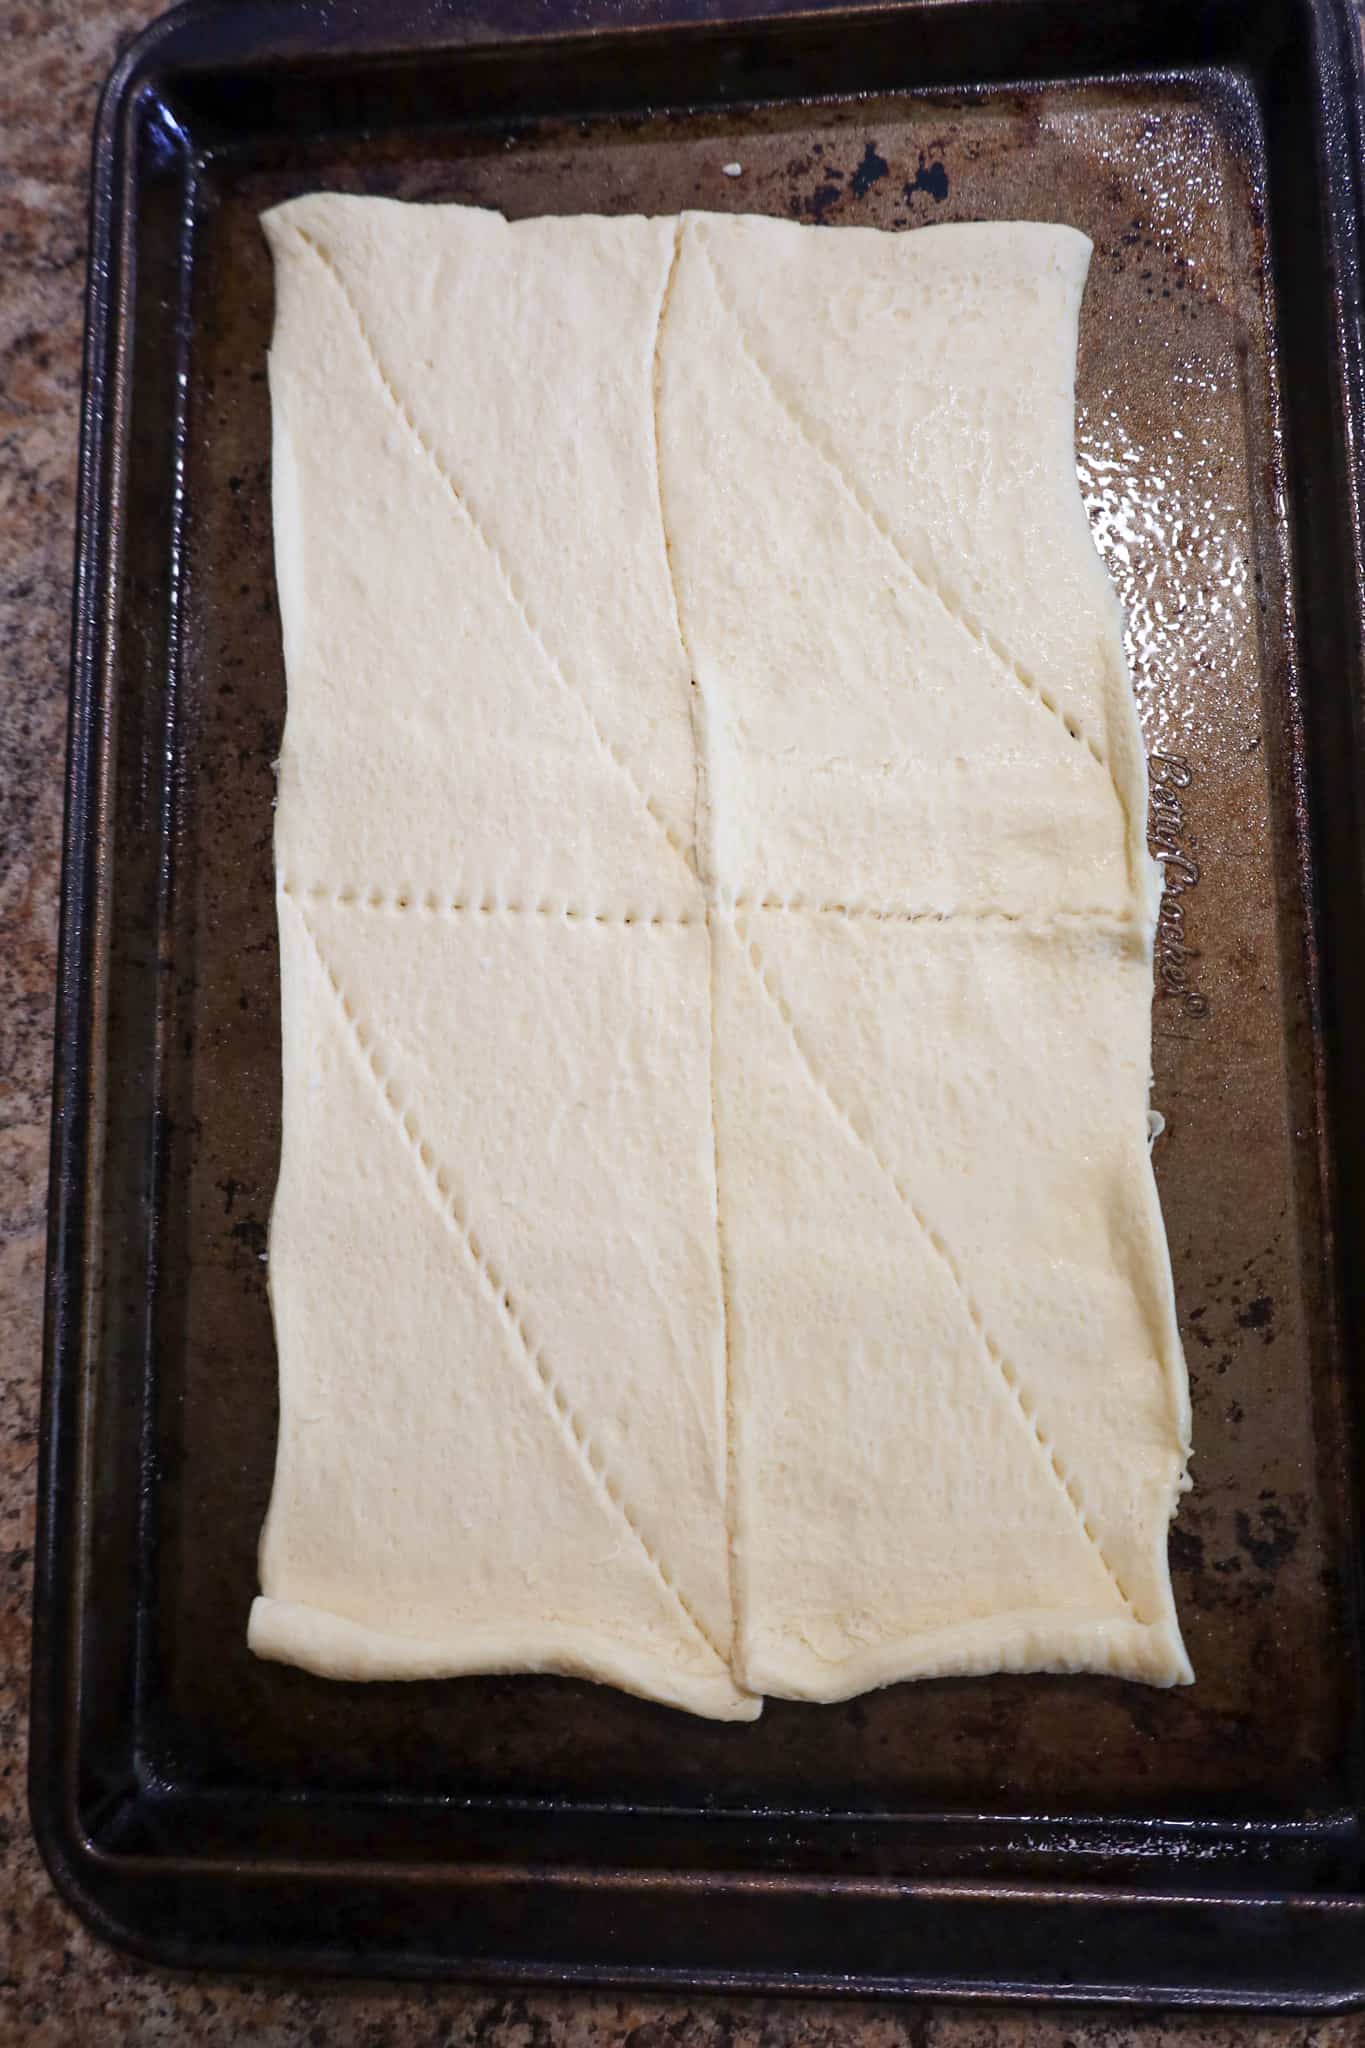 crescent dough on greased baking sheet